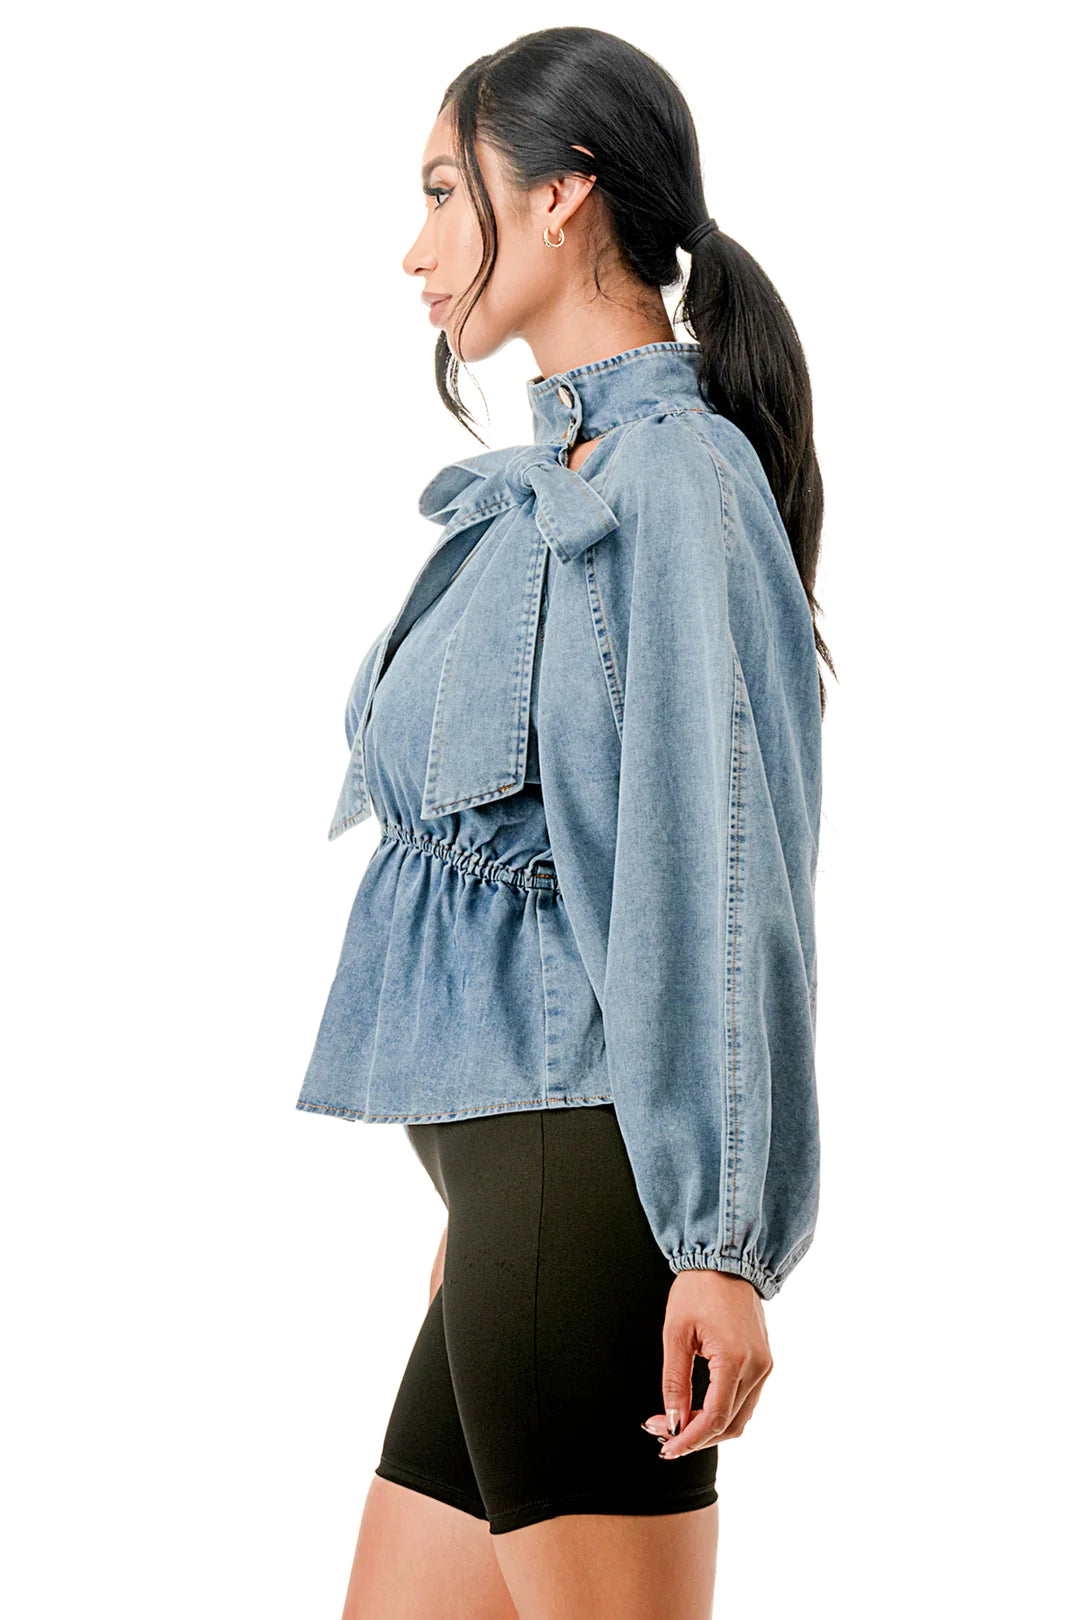 Claire clinched waist Bow tie Denim Top